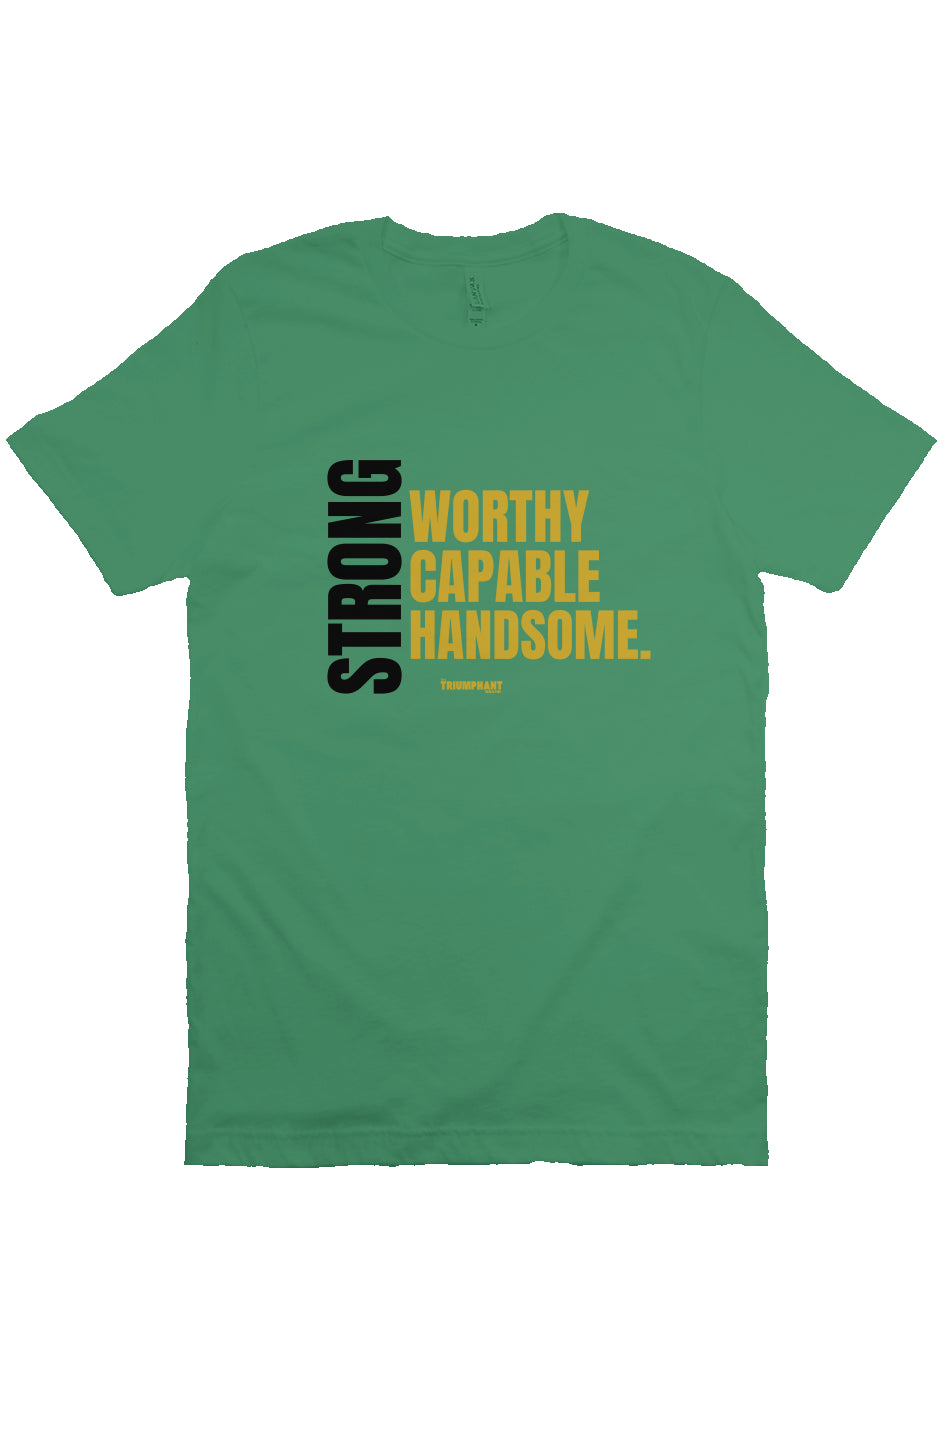 Strong, Worthy, Capable, Handsome. | Triumphant Tee